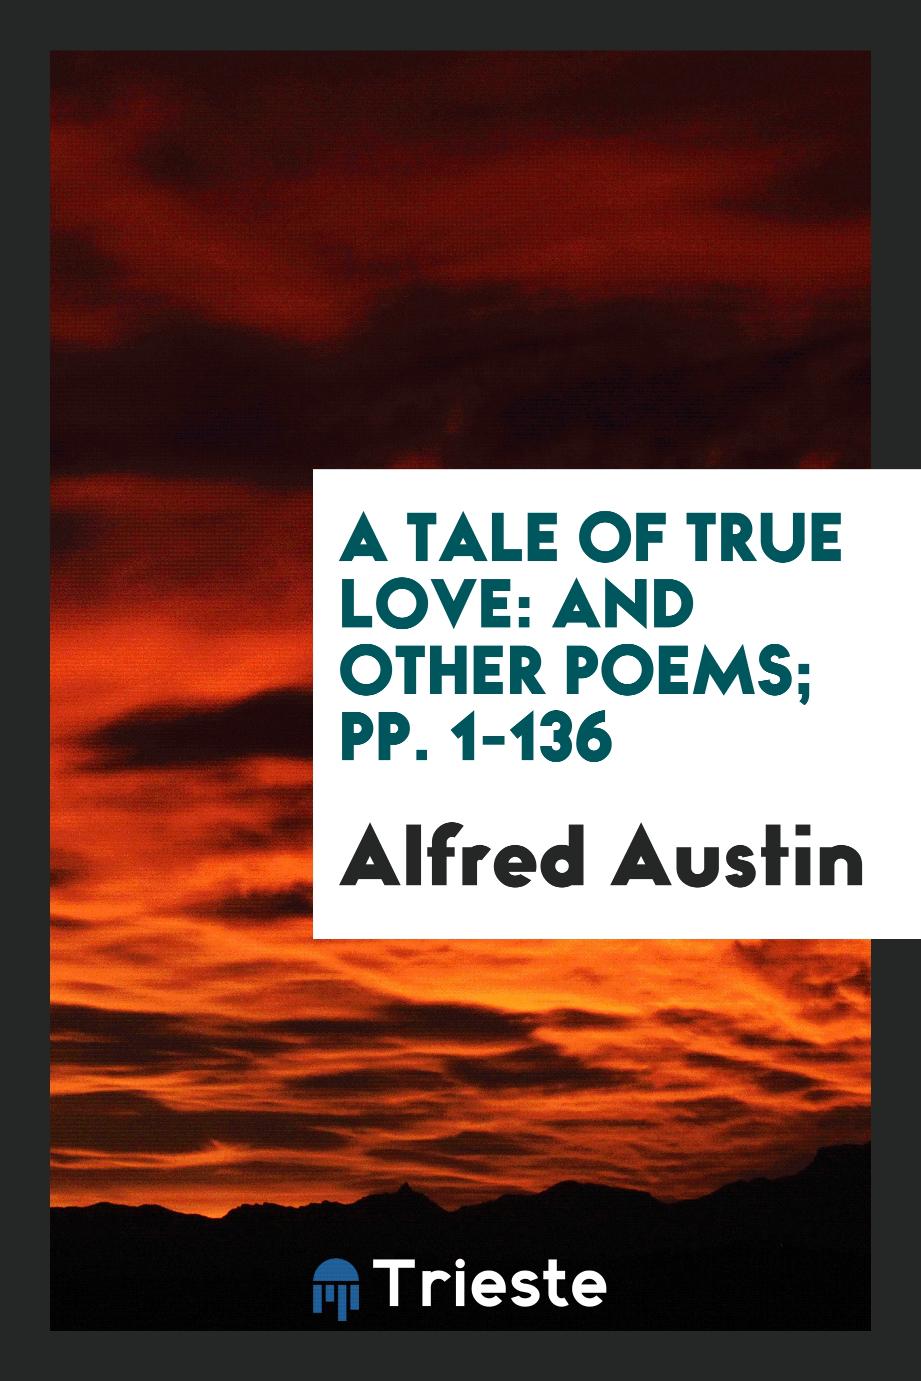 A Tale of True Love: And Other Poems; pp. 1-136